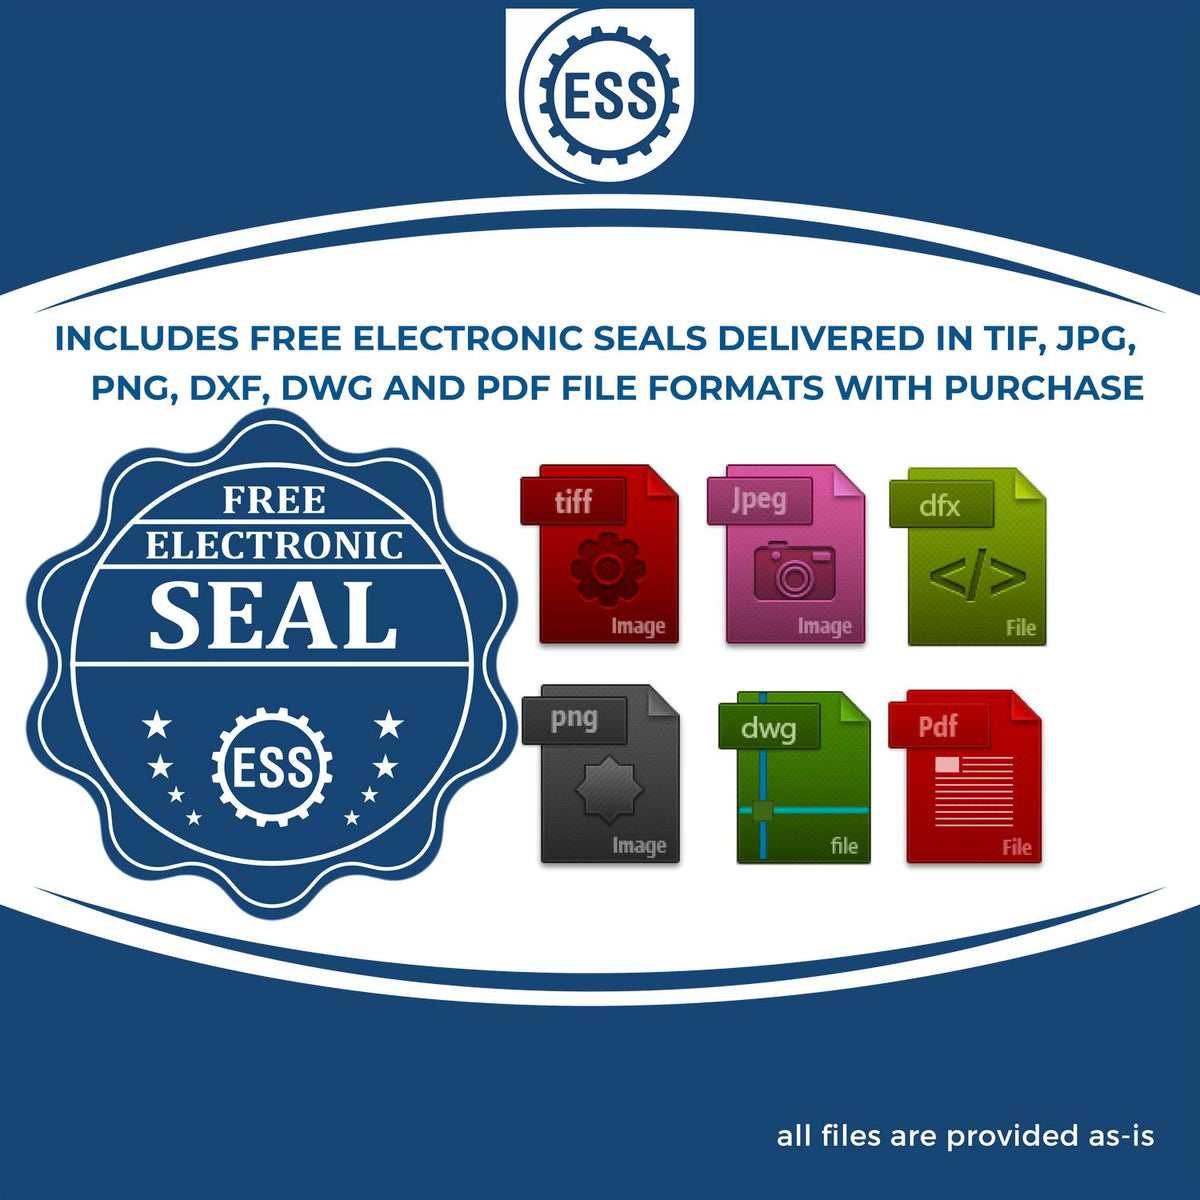 An infographic for the free electronic seal for the Hybrid Mississippi Land Surveyor Seal illustrating the different file type icons such as DXF, DWG, TIF, JPG and PNG.